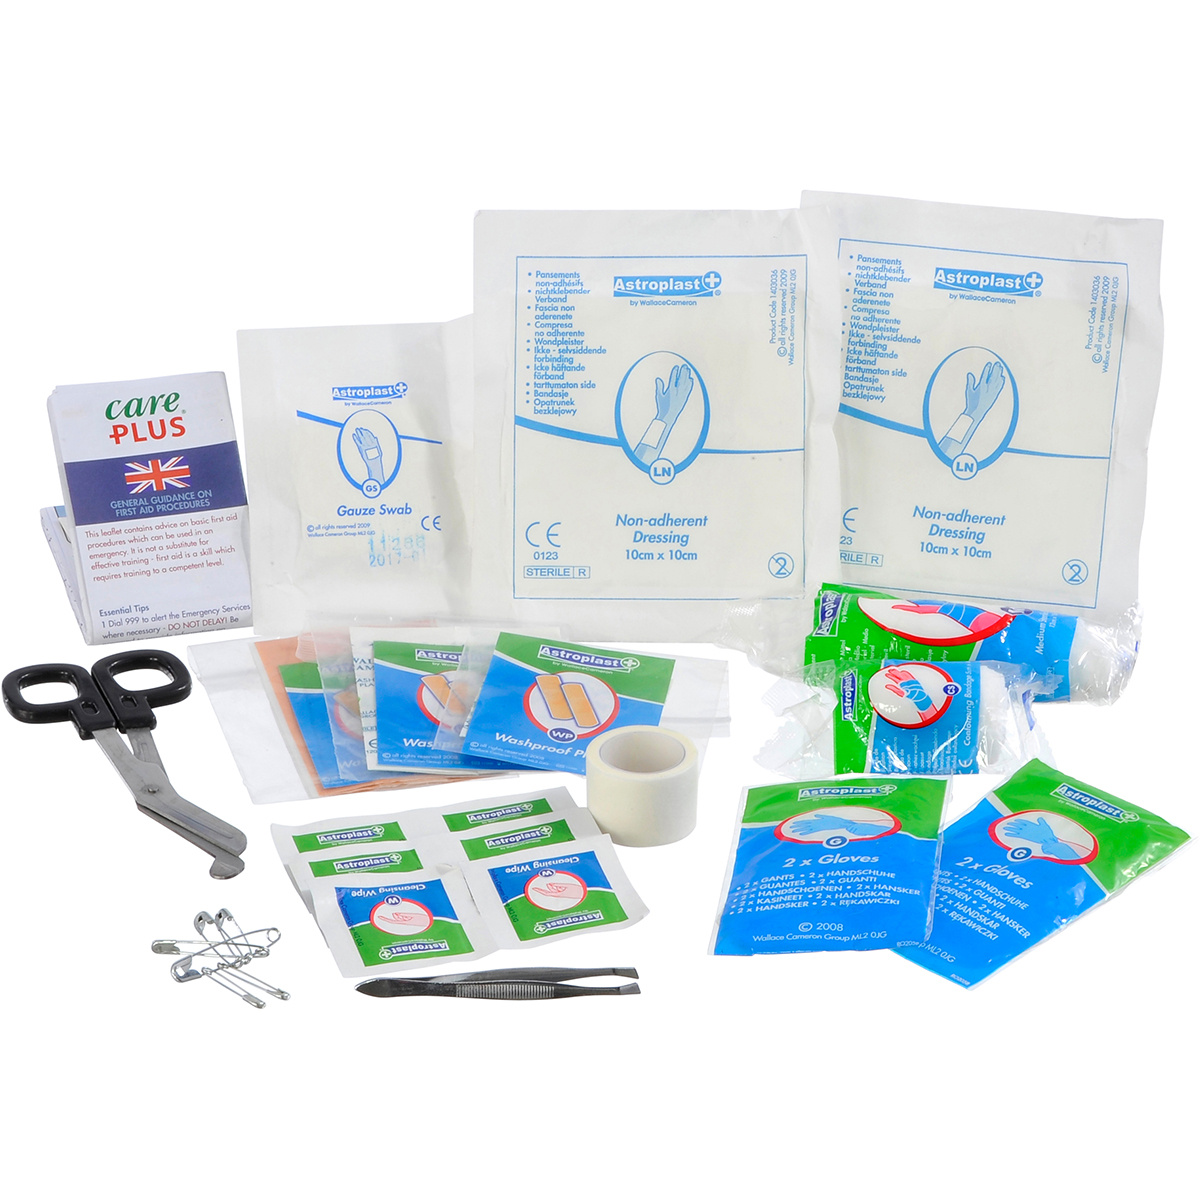 Care Plus First Aid Kit Compact 2